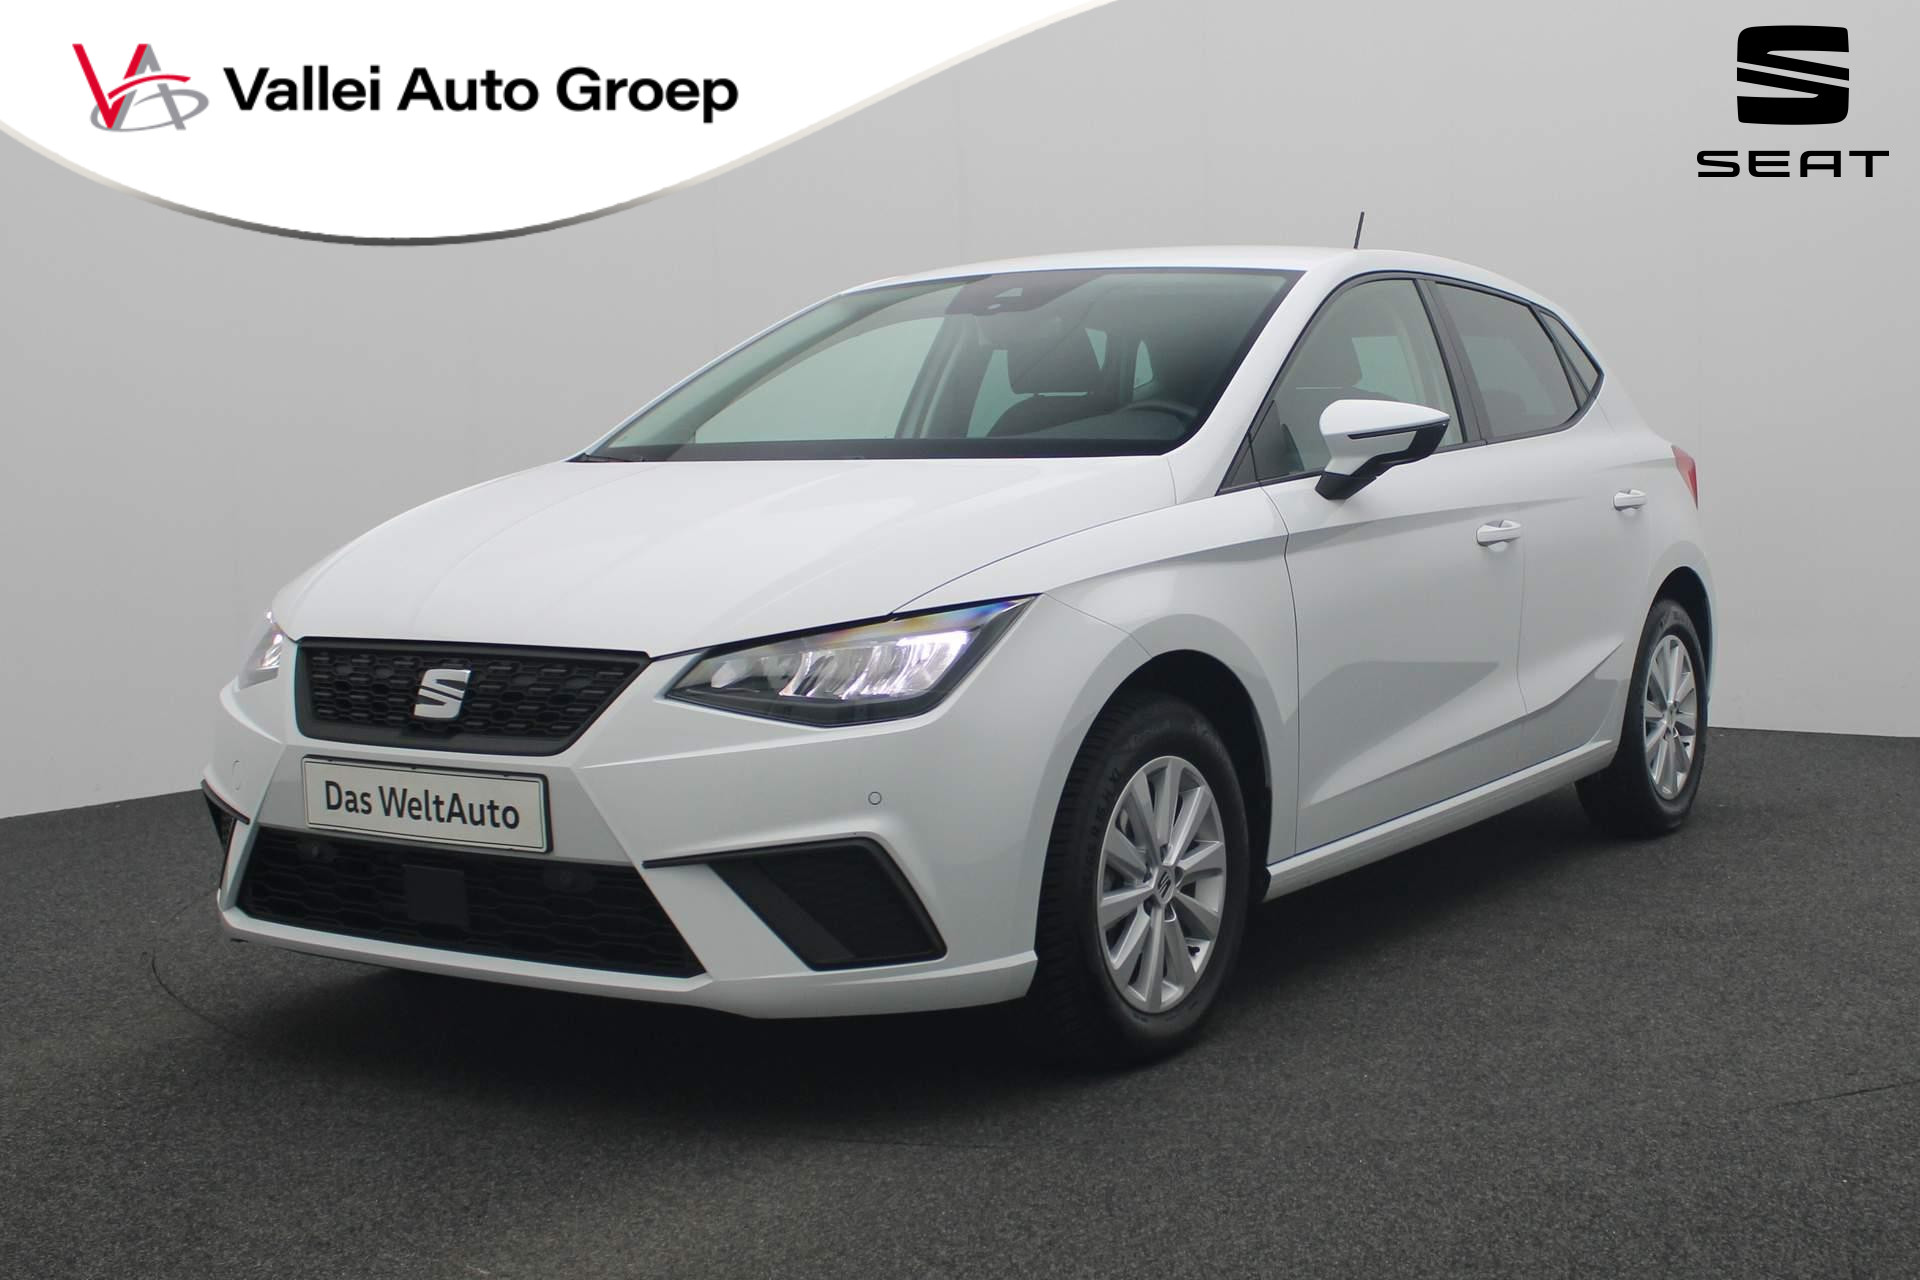 SEAT Ibiza 1.0 TSI 95PK Style Business Connect | Navi | Cruise | Clima | Parkeersensoren voor/achter | 15 inch